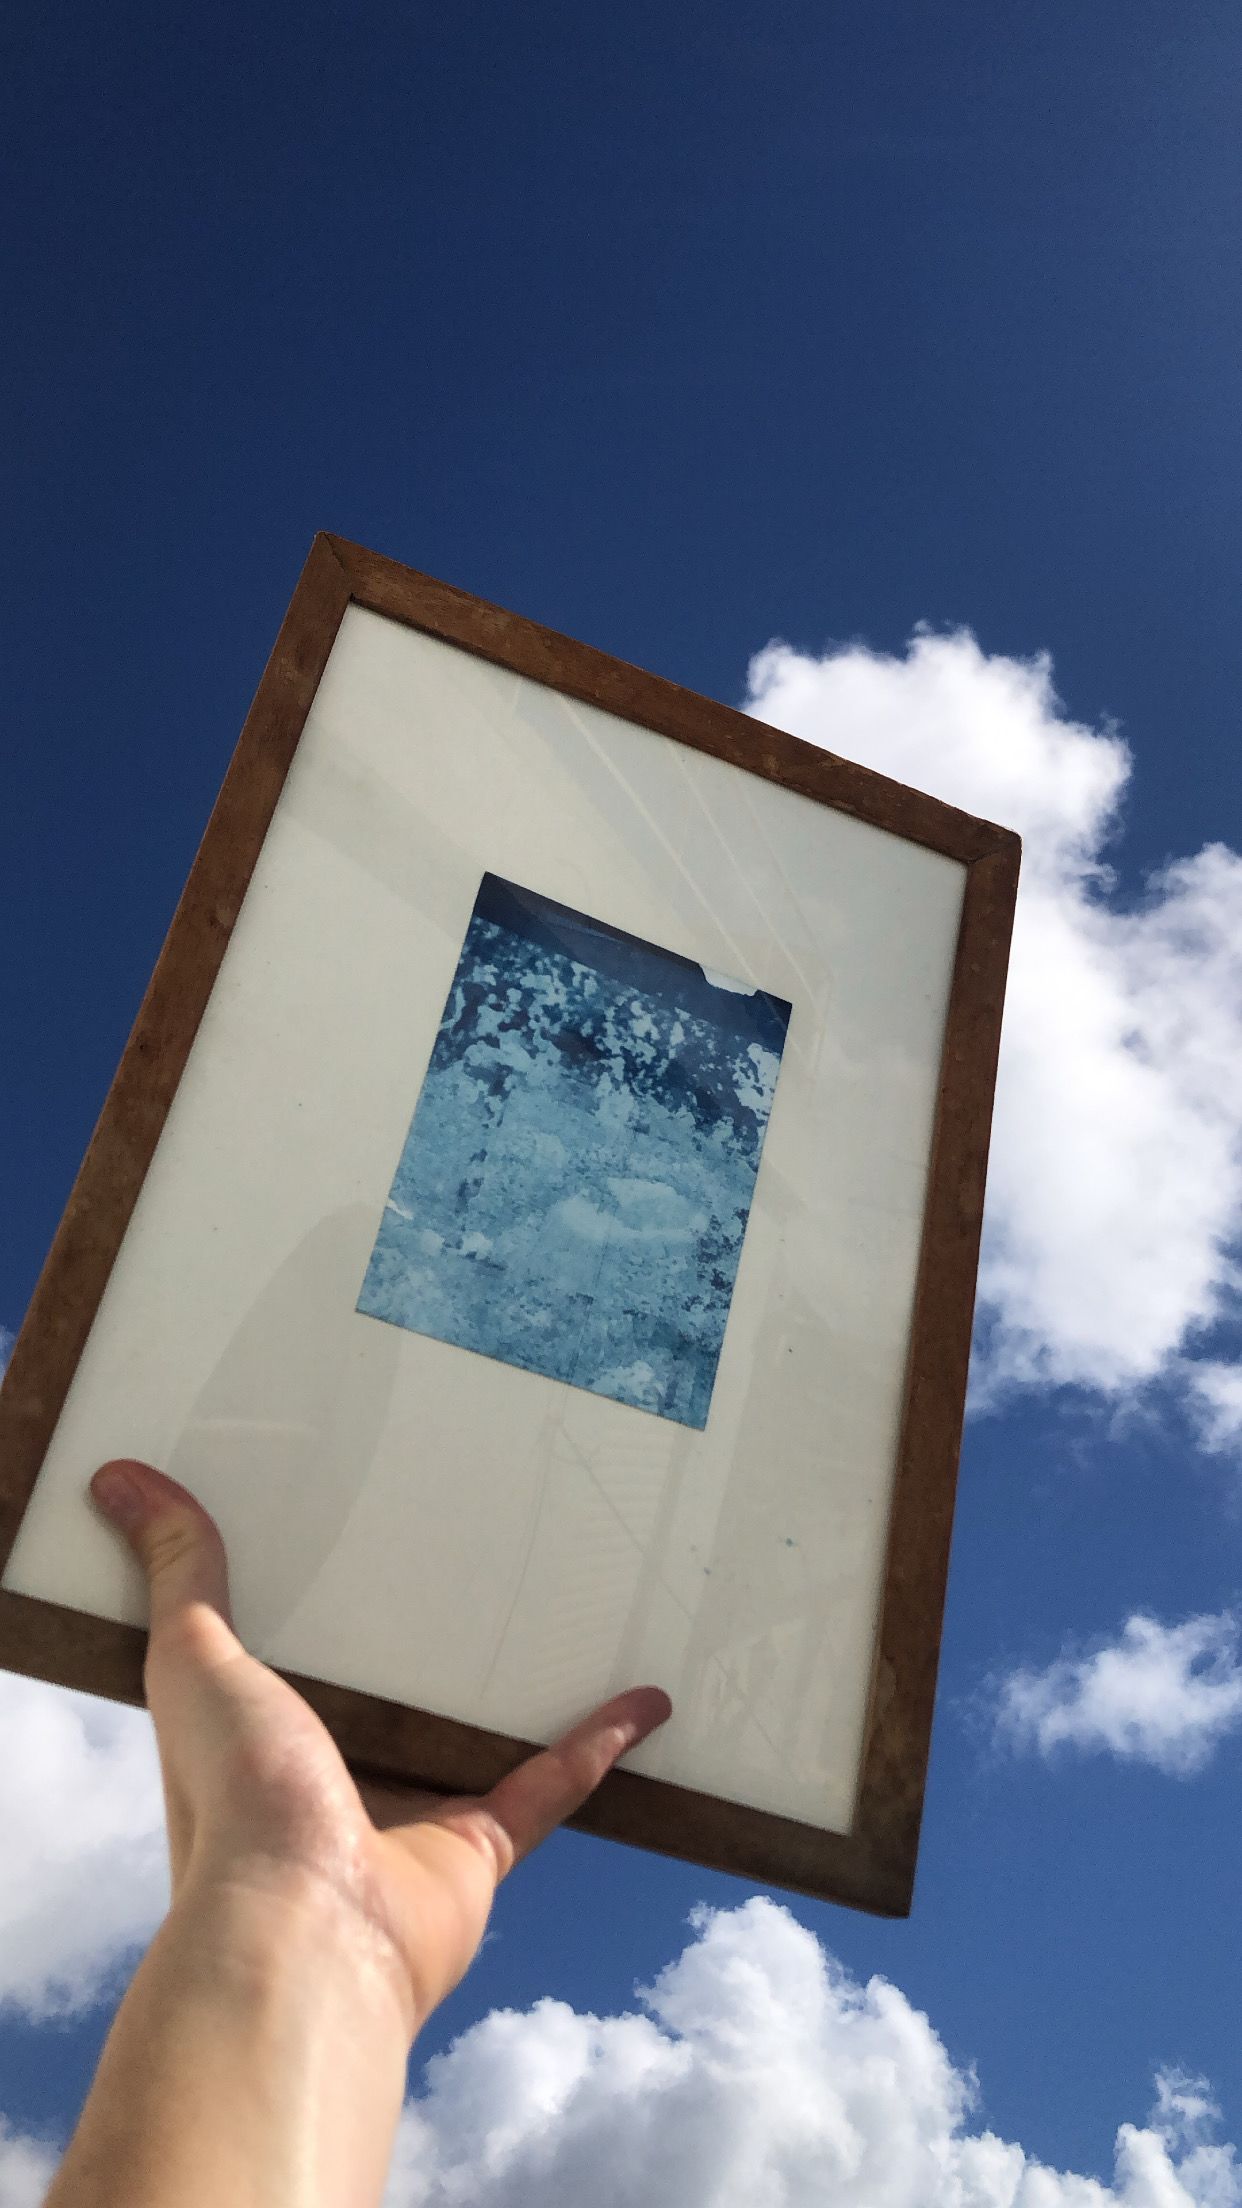 A hand holding a framed image up to the sky